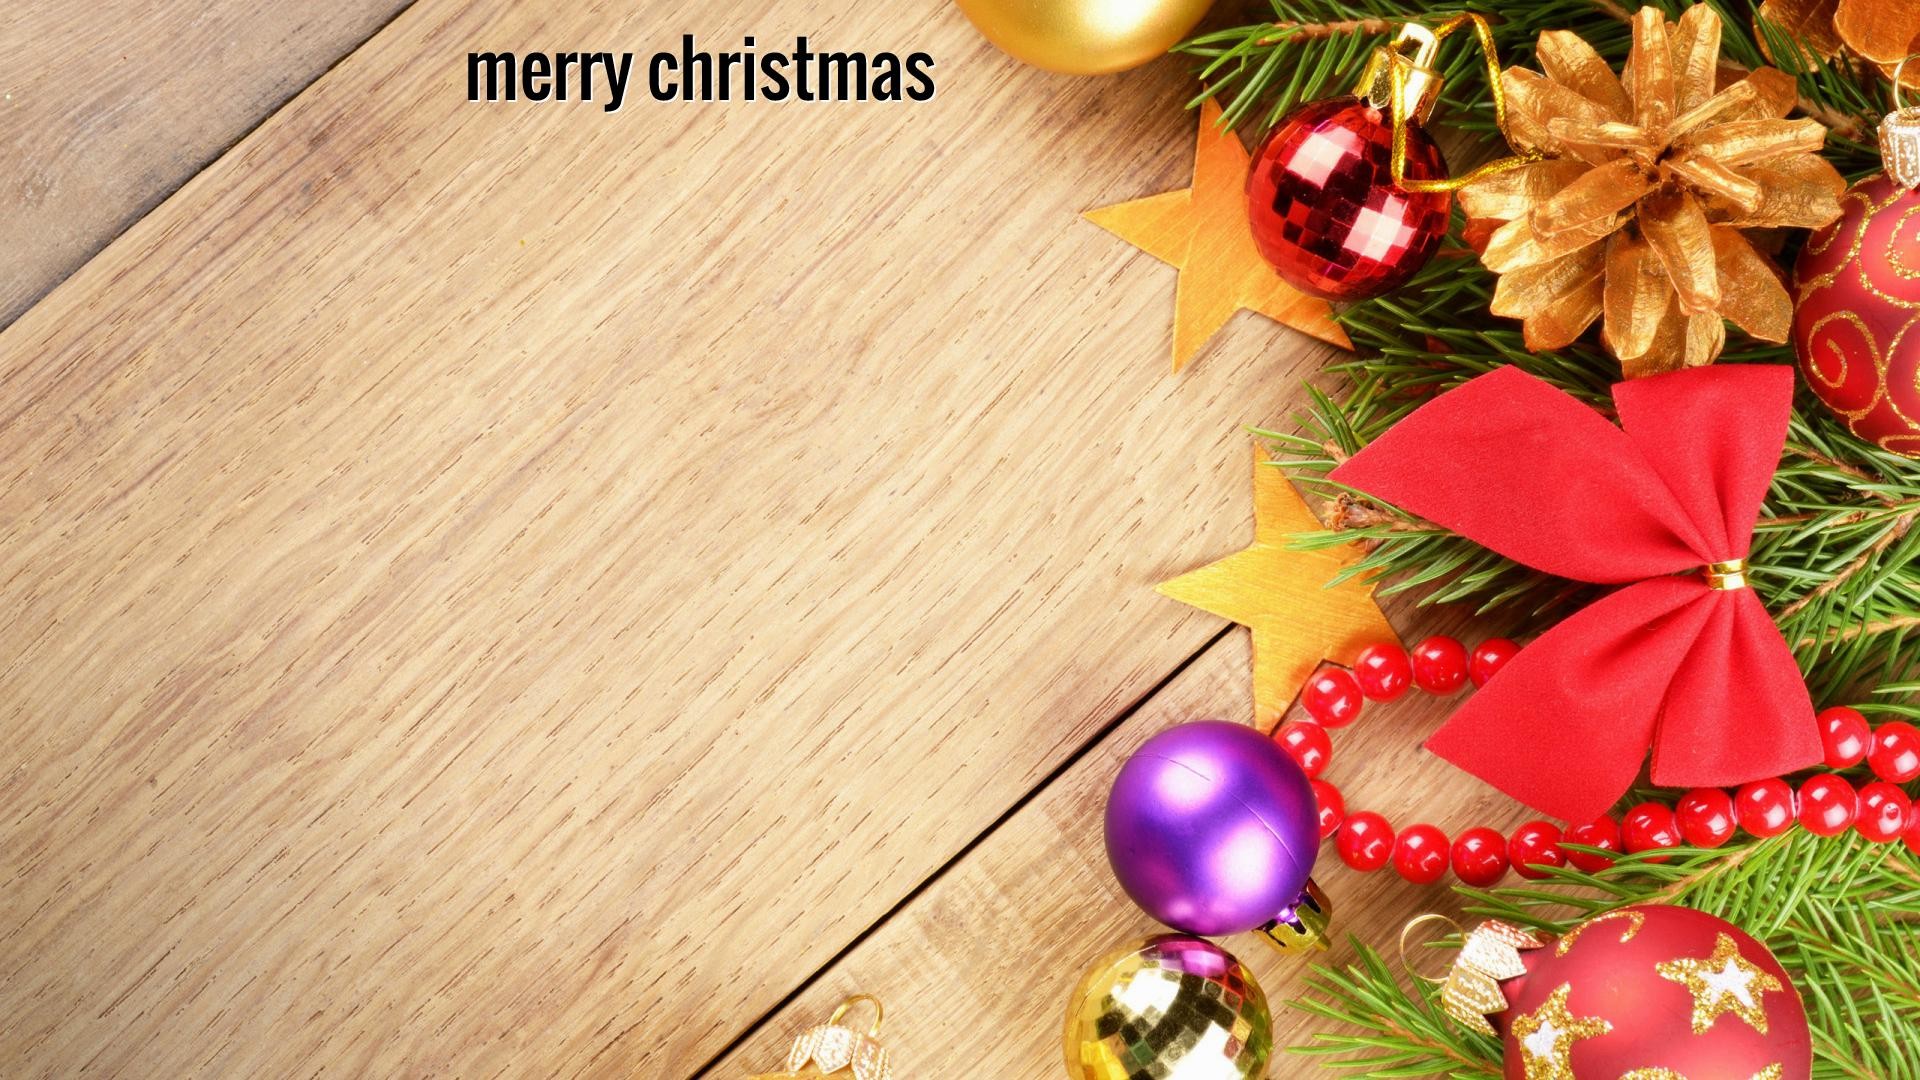 1920x1080 New-merry-christmas-wallpapers-for-Desktop